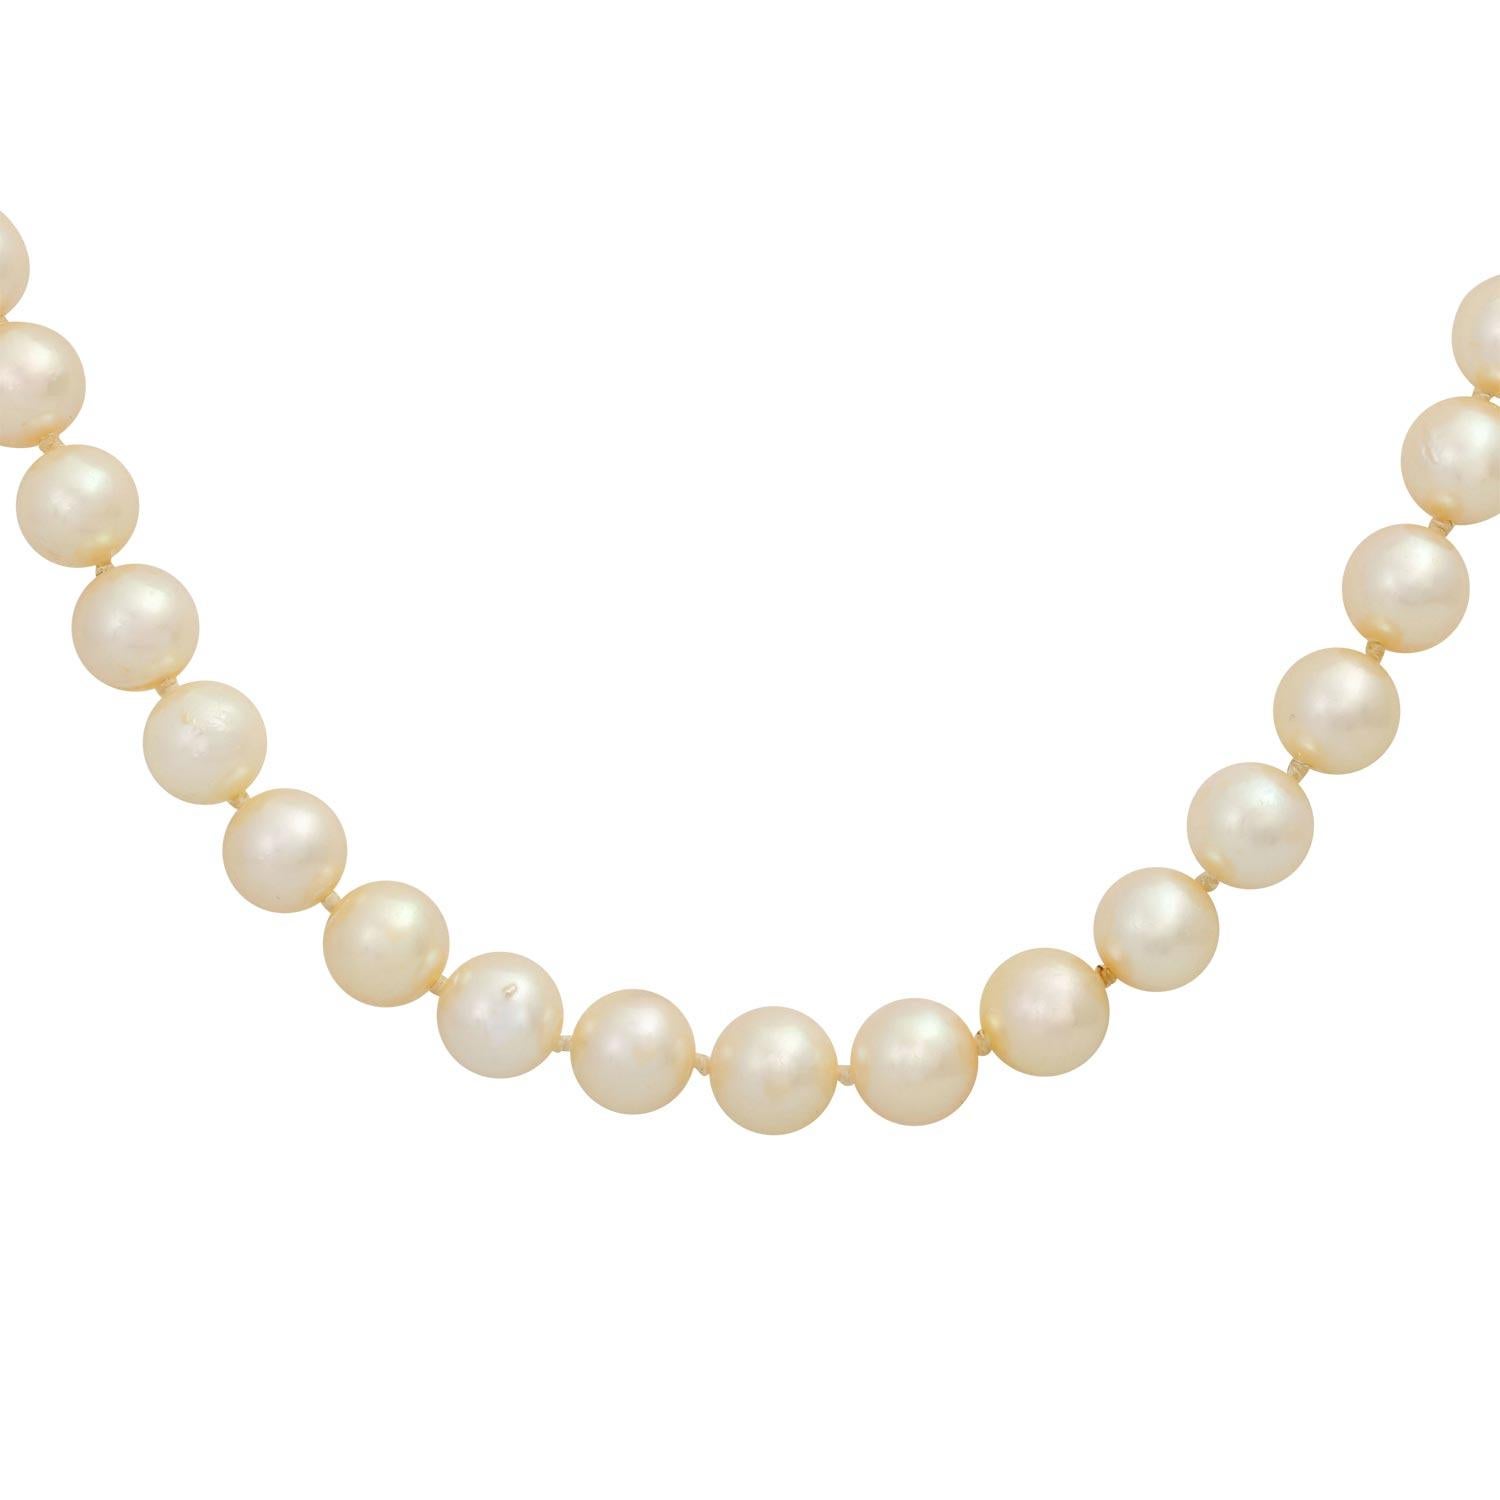 Cultured pearl necklace approx. 7 mm, beautiful luster, clasp with fac. Rubies, GG/WG 14K, L: approx. 46 cm.
